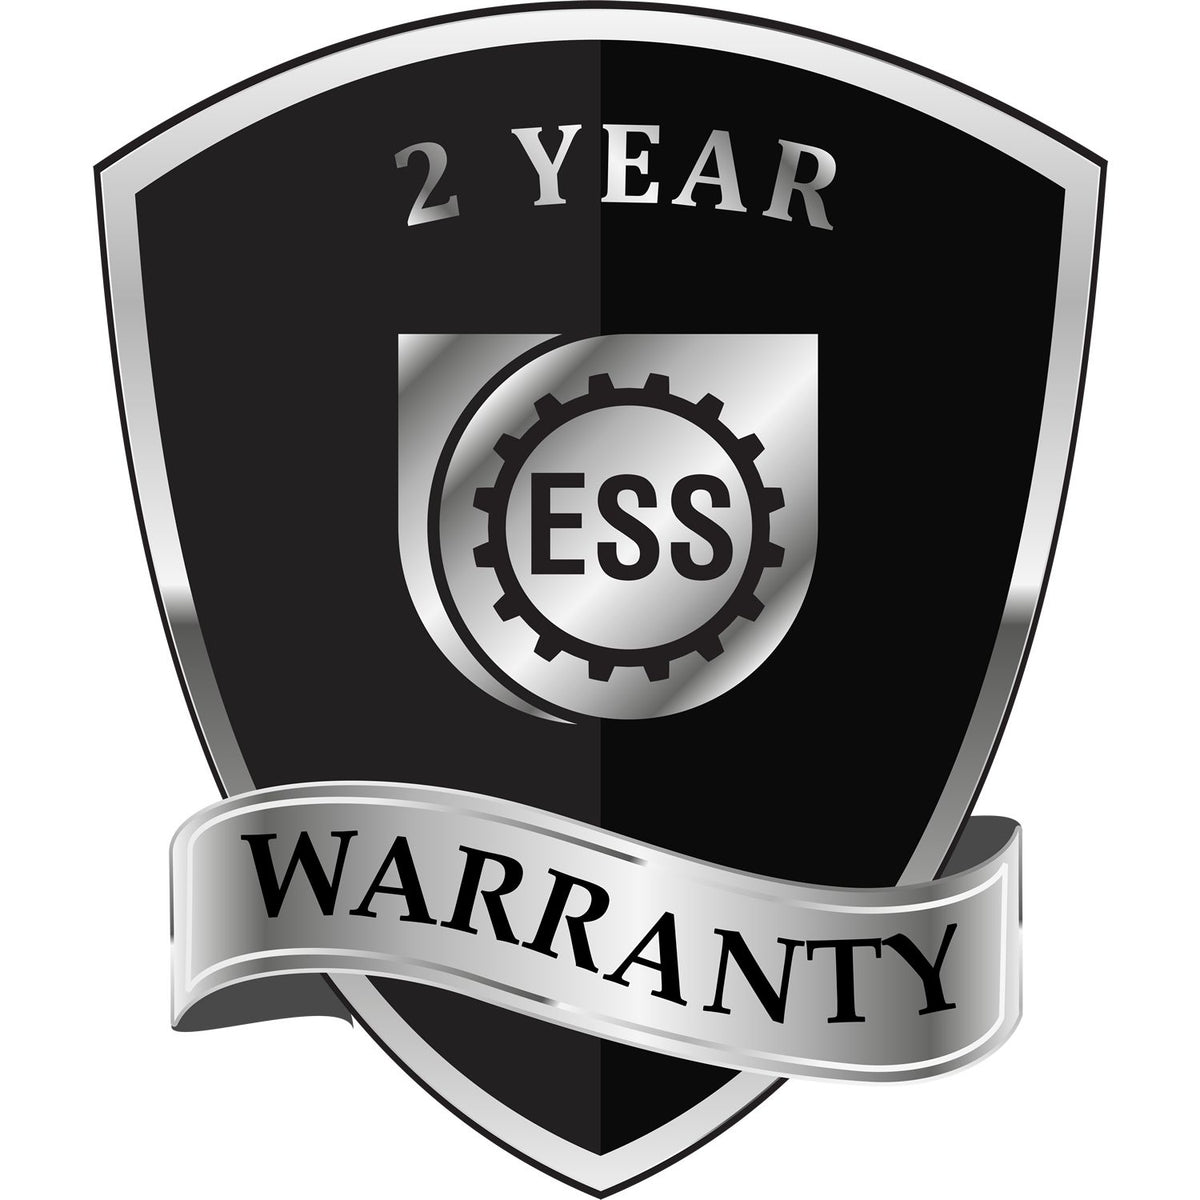 A badge or emblem showing a warranty icon for the Extended Long Reach Tennessee Architect Seal Embosser